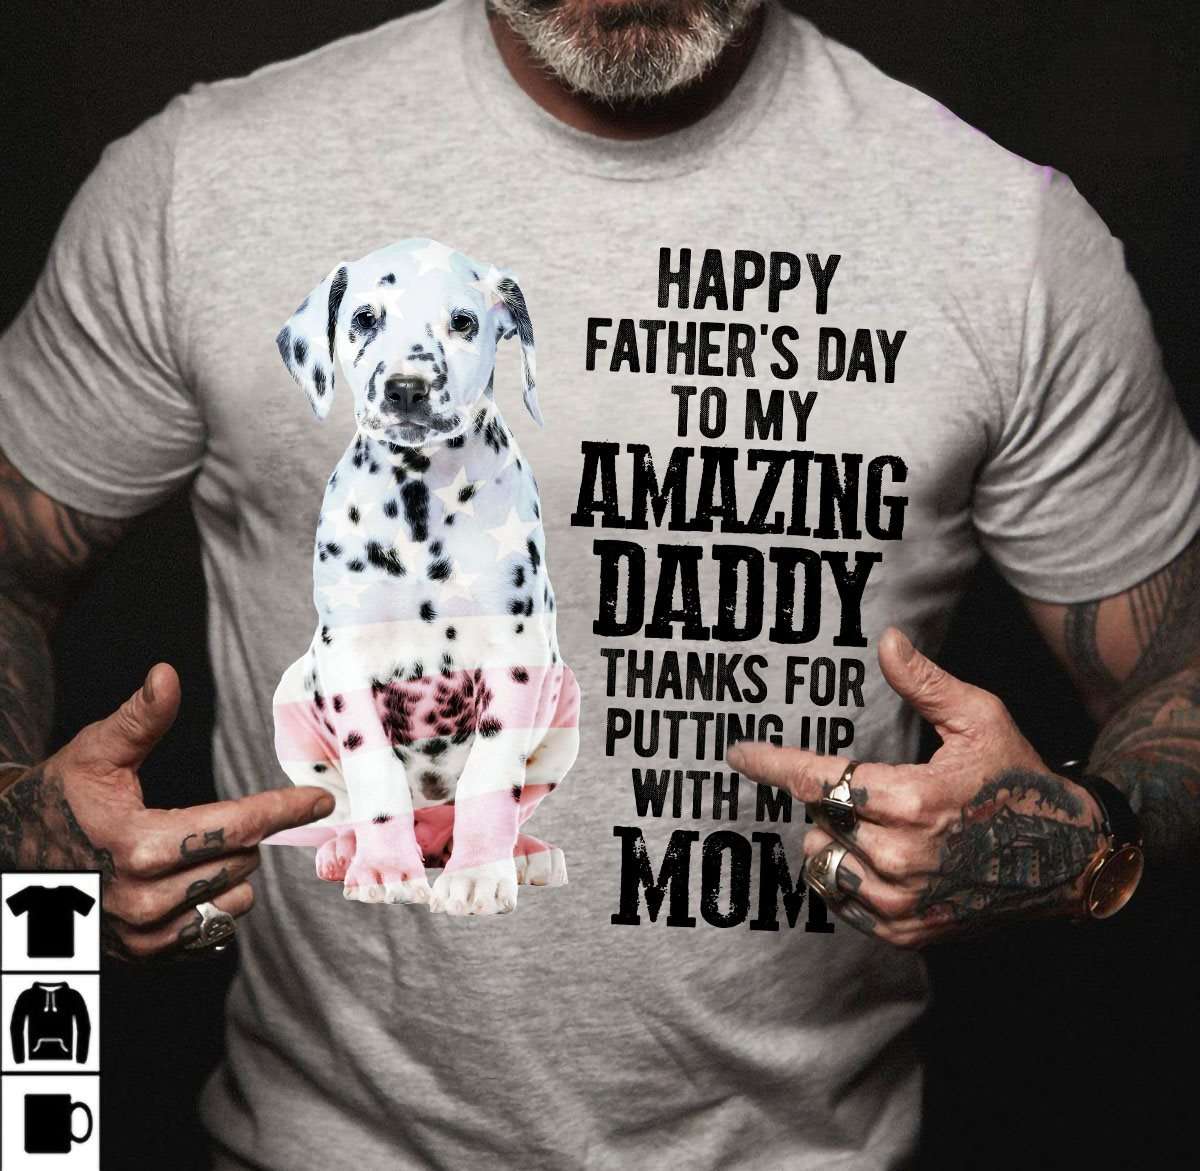 Dalmatian Dog - Happy father's day to my amazing daddy thanks for putting up with my mom